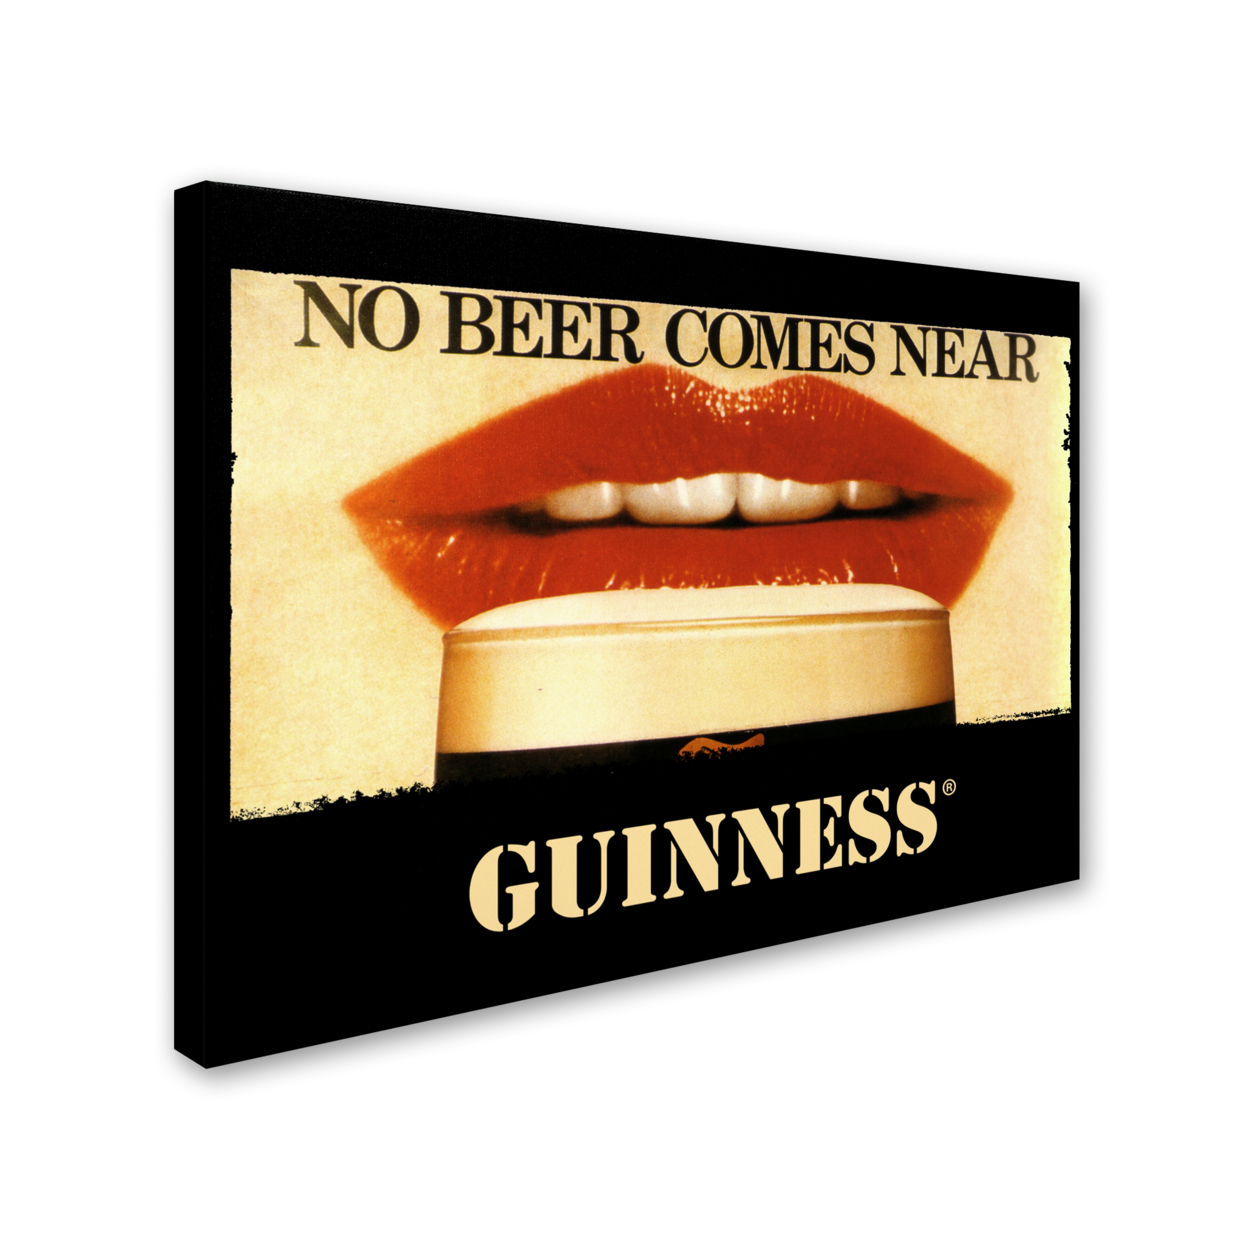 Guinness Brewery 'No Beer Comes Near' 14 X 19 Canvas Art